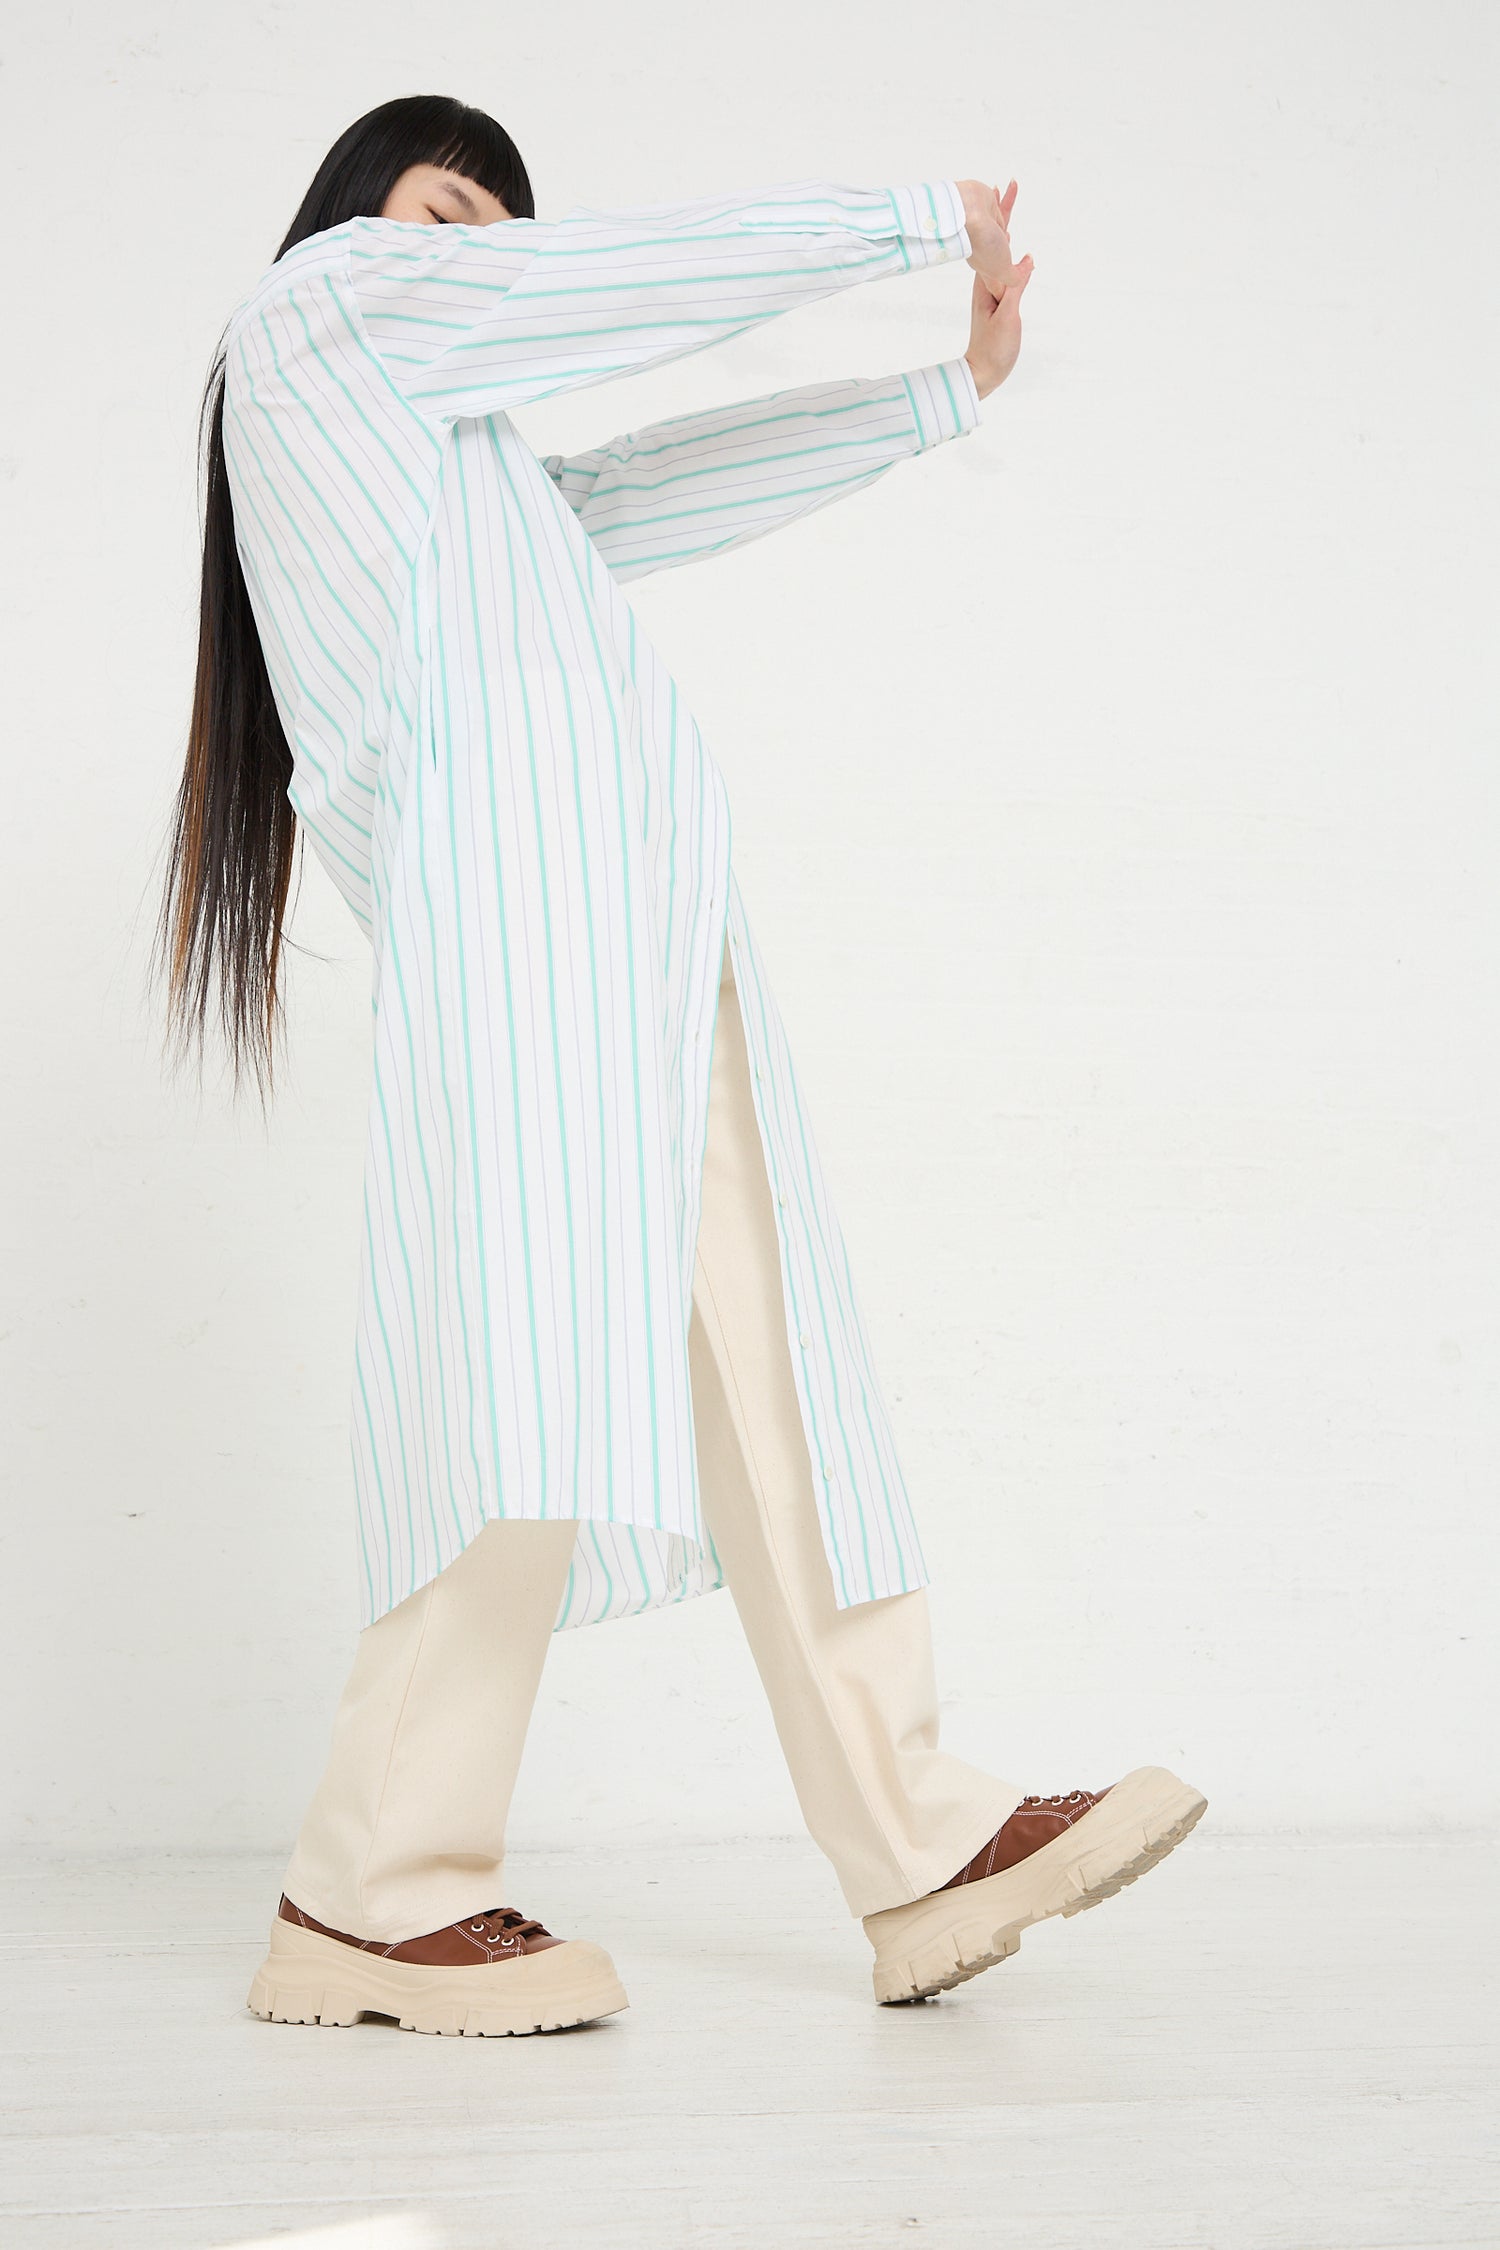 A woman poses sideways in a Baserange Organic Cotton Ole Shirt Dress in Stripe and cream trousers, with her face obscured by her arm.